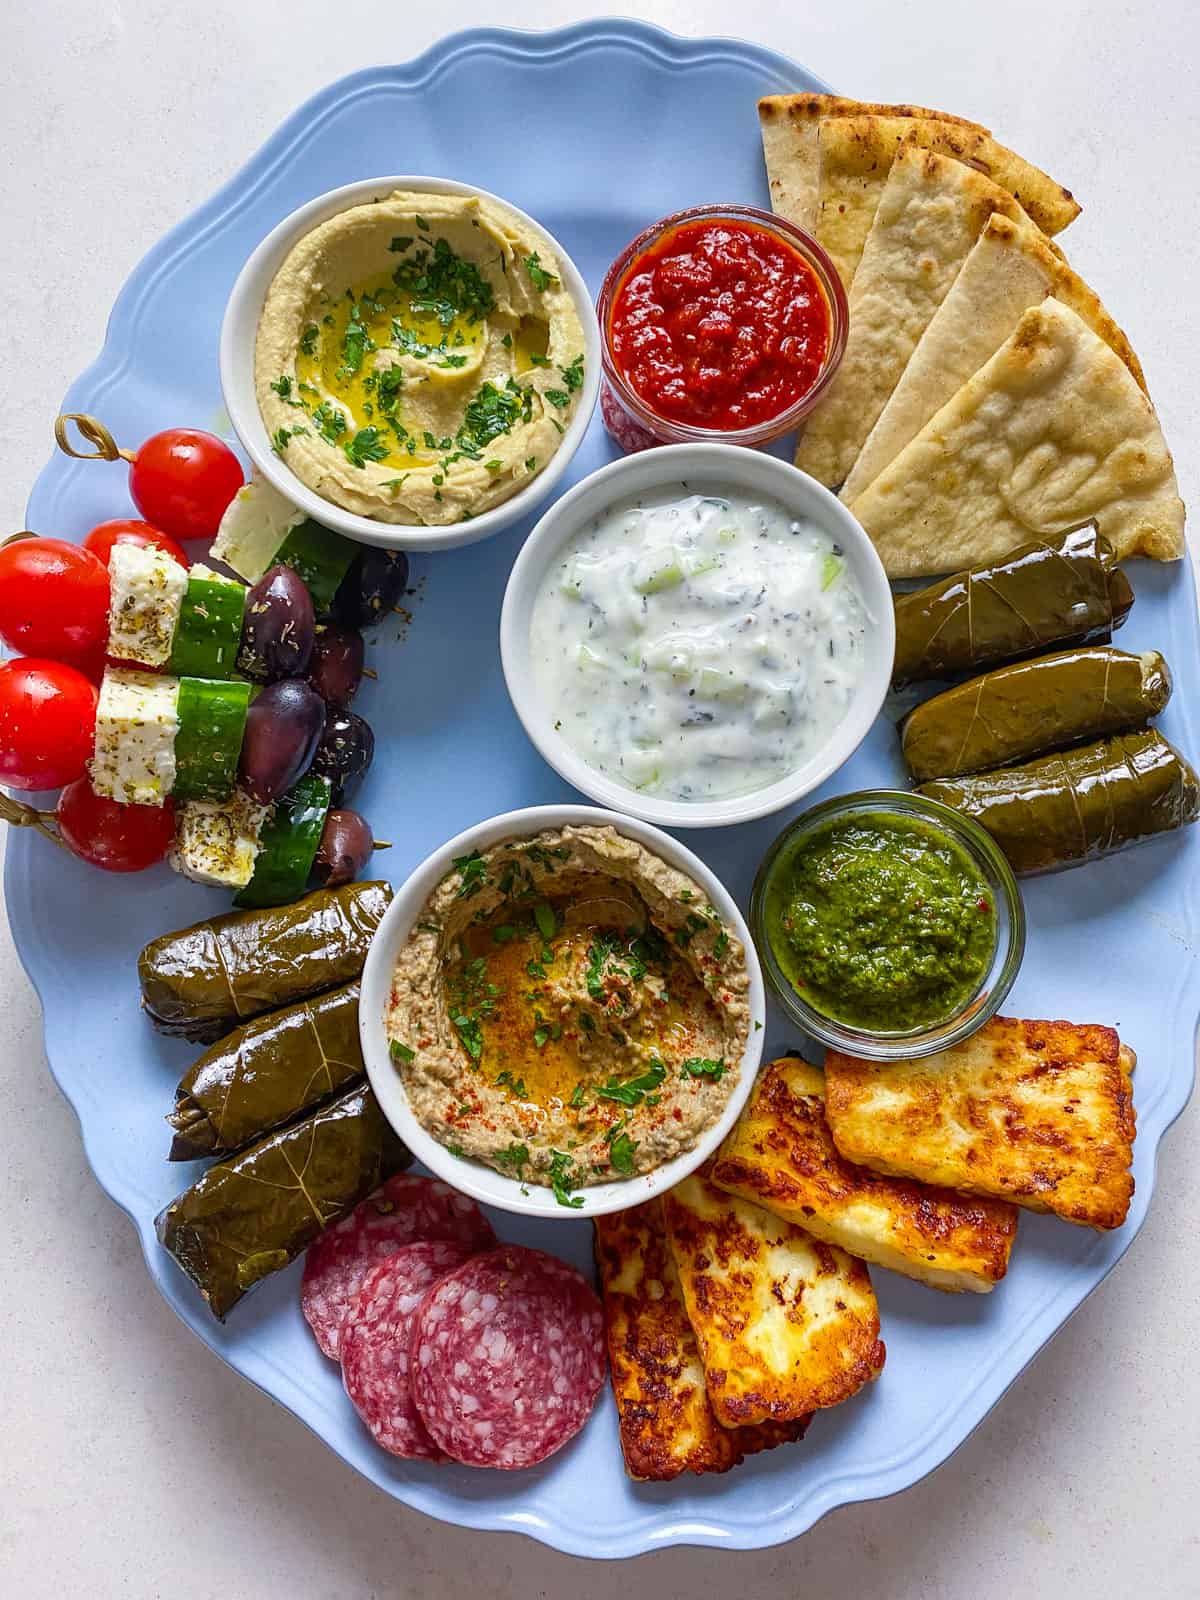 Fill up the mezze board with larger mezze, such as stuffed grape leaves and cheeses.